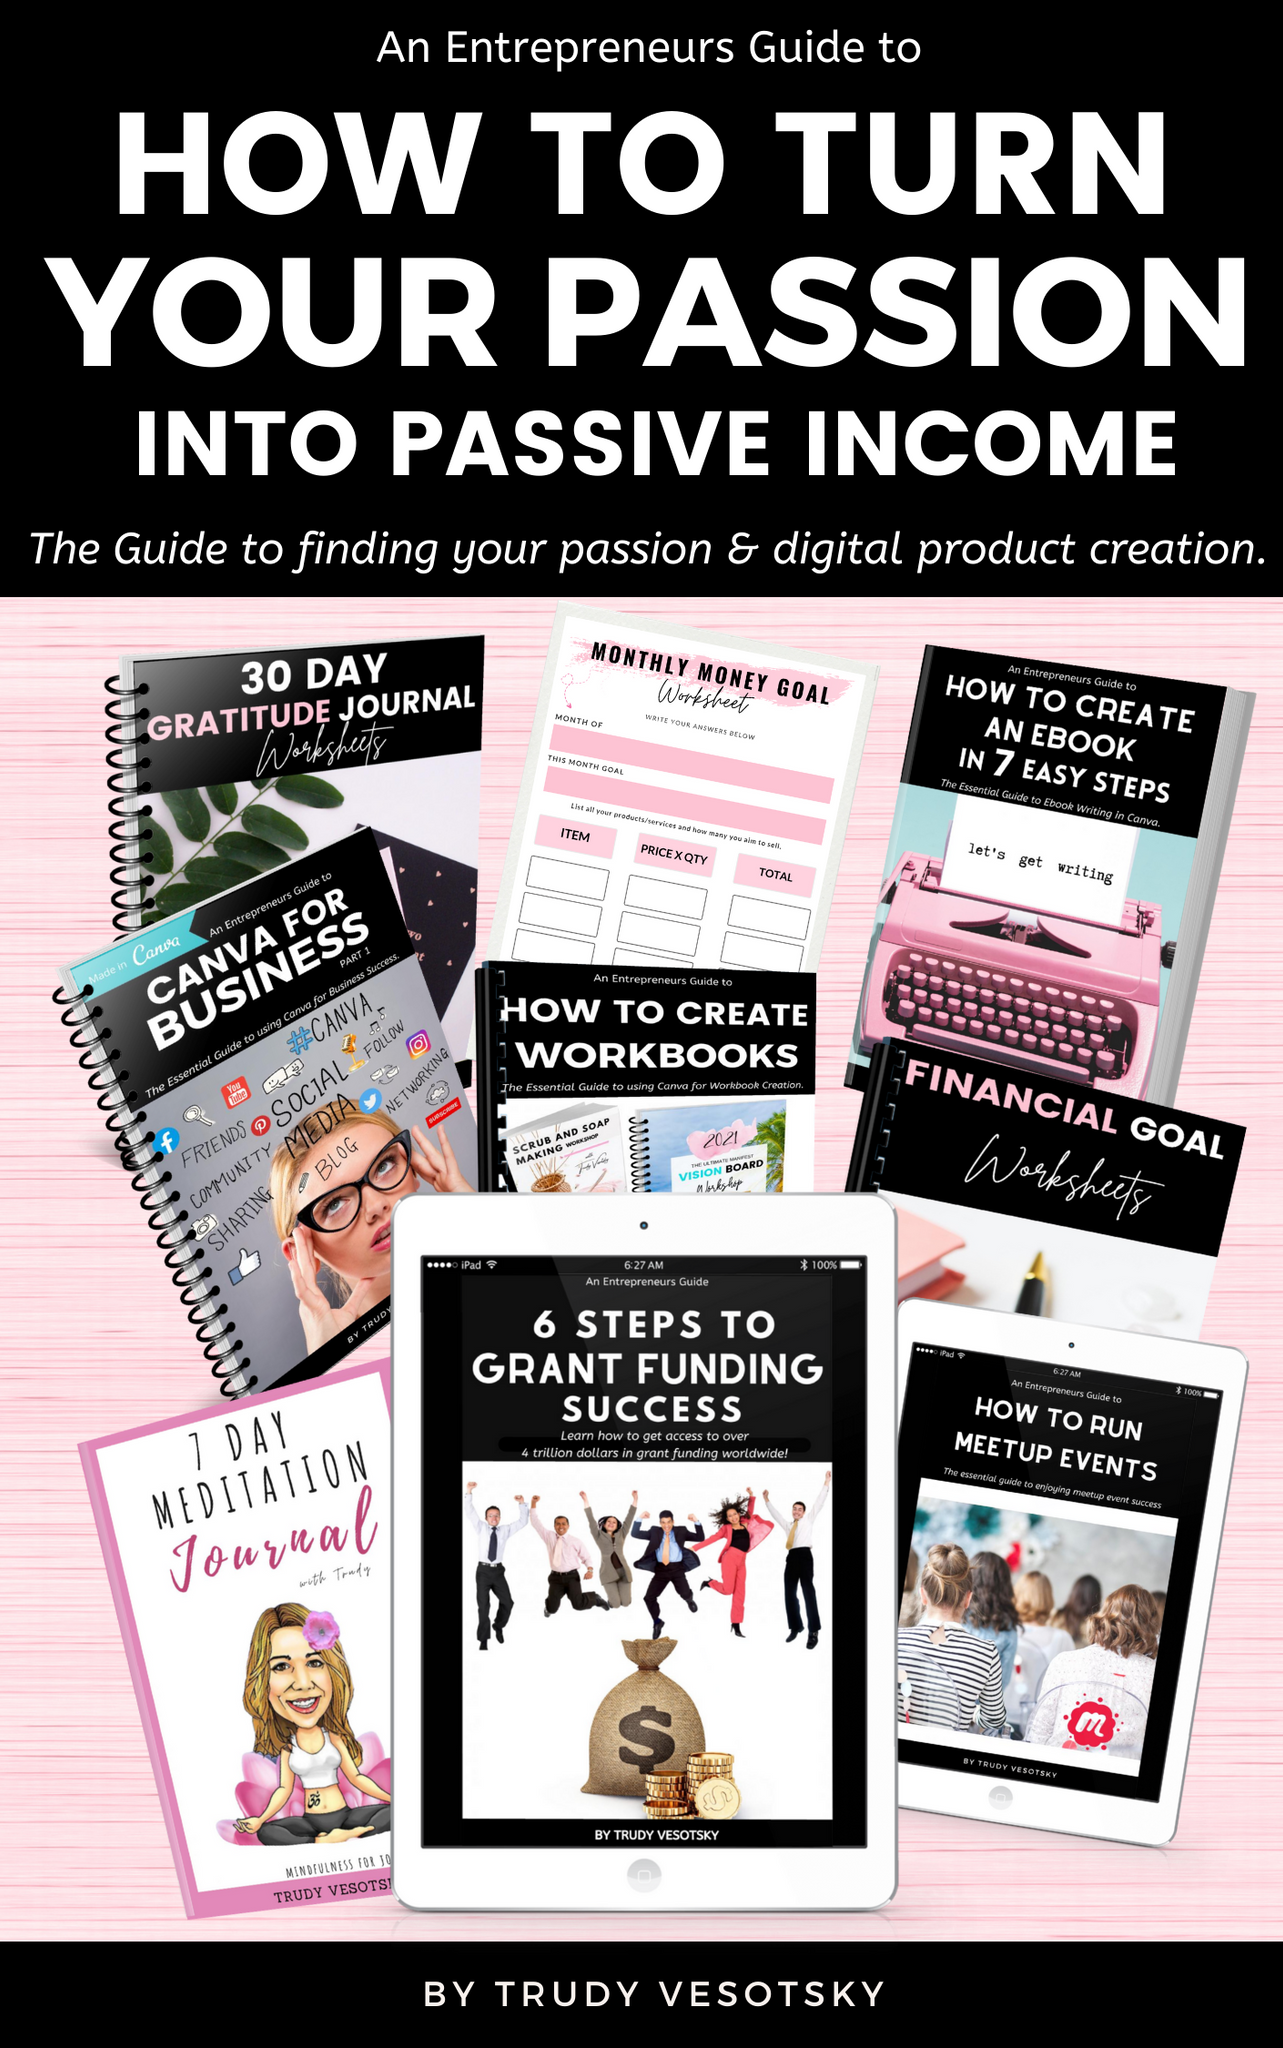 Turn your Passion into Passive Income - Digital Products and more